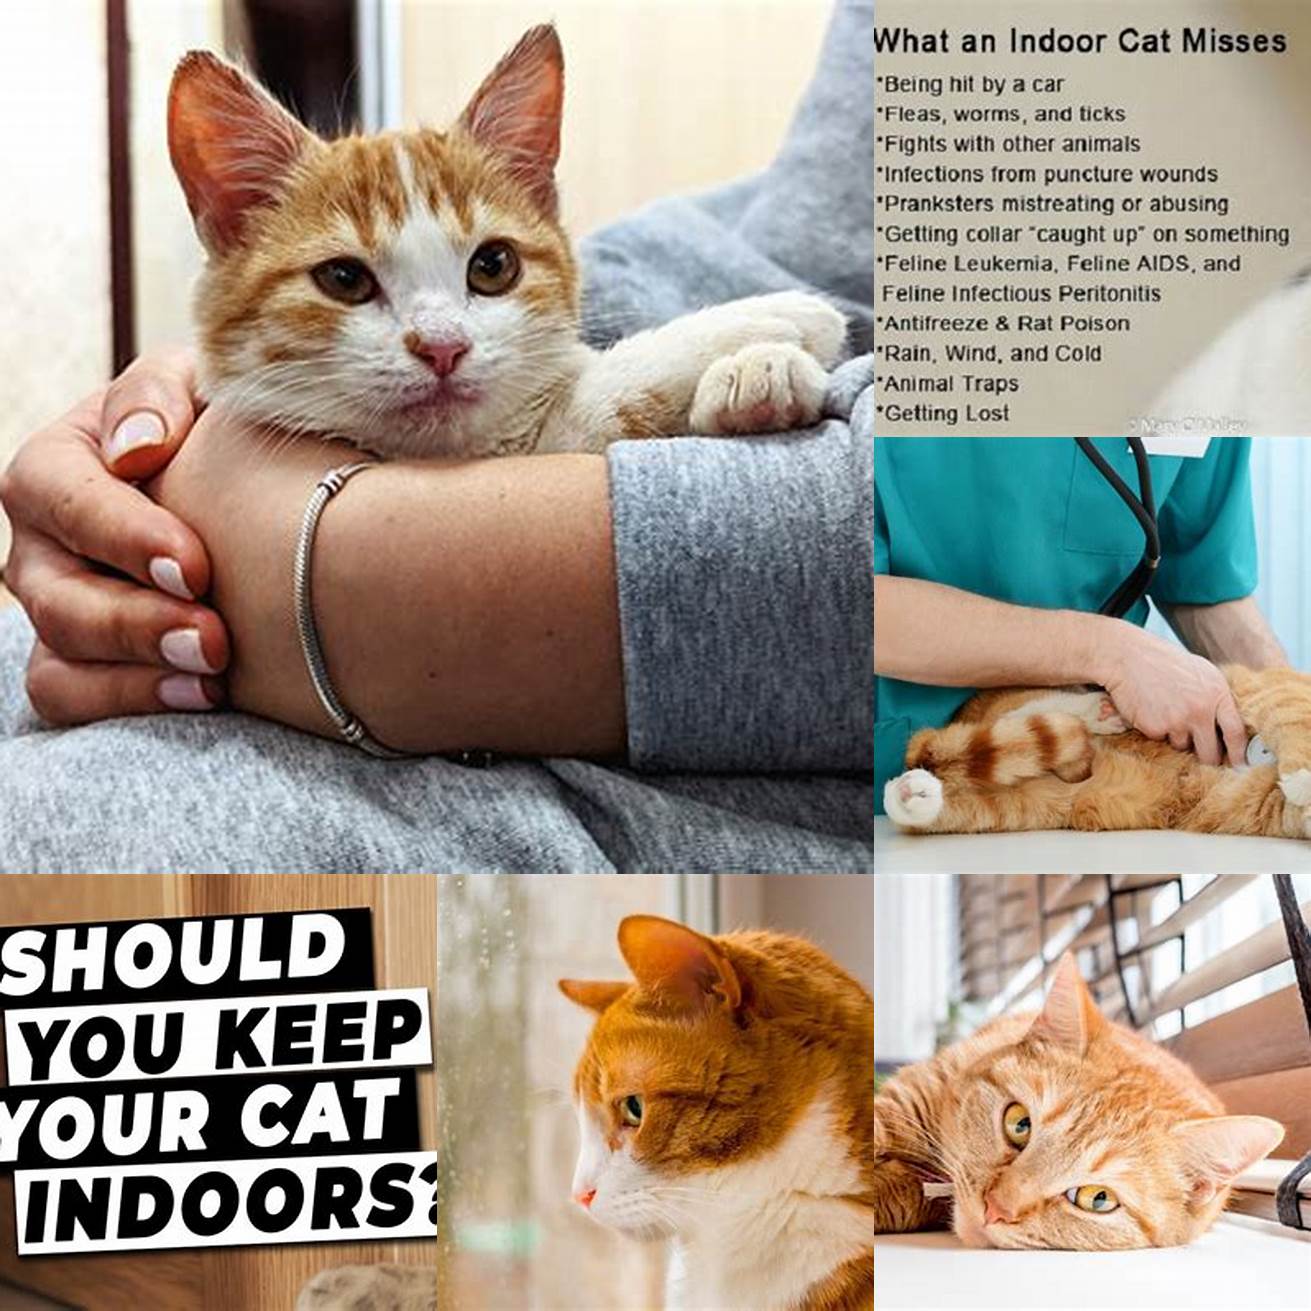 Keeping your cat indoors can reduce the risk of infection